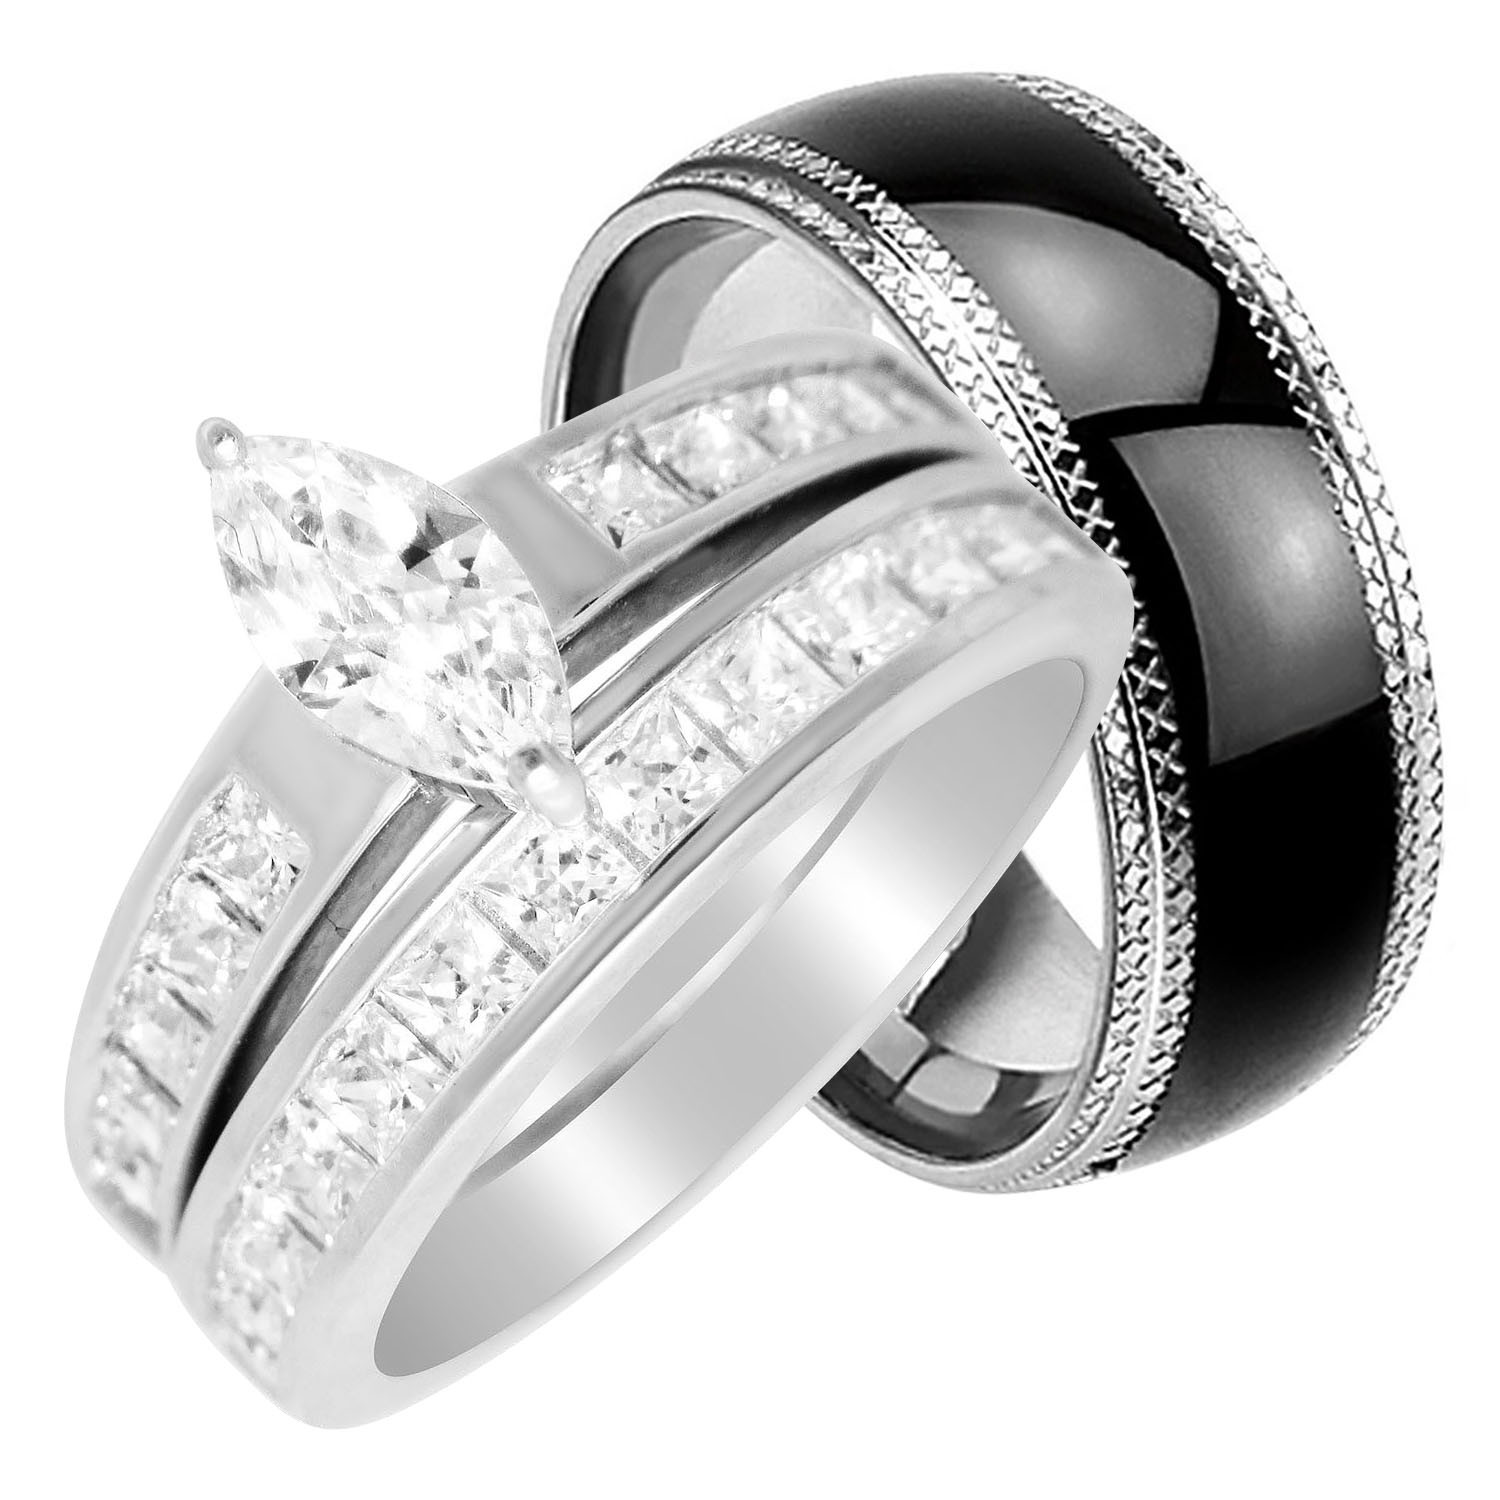 Cheap Wedding Band Sets His And Hers
 LaRaso & Co His Hers Wedding Rings Set Cheap Matching